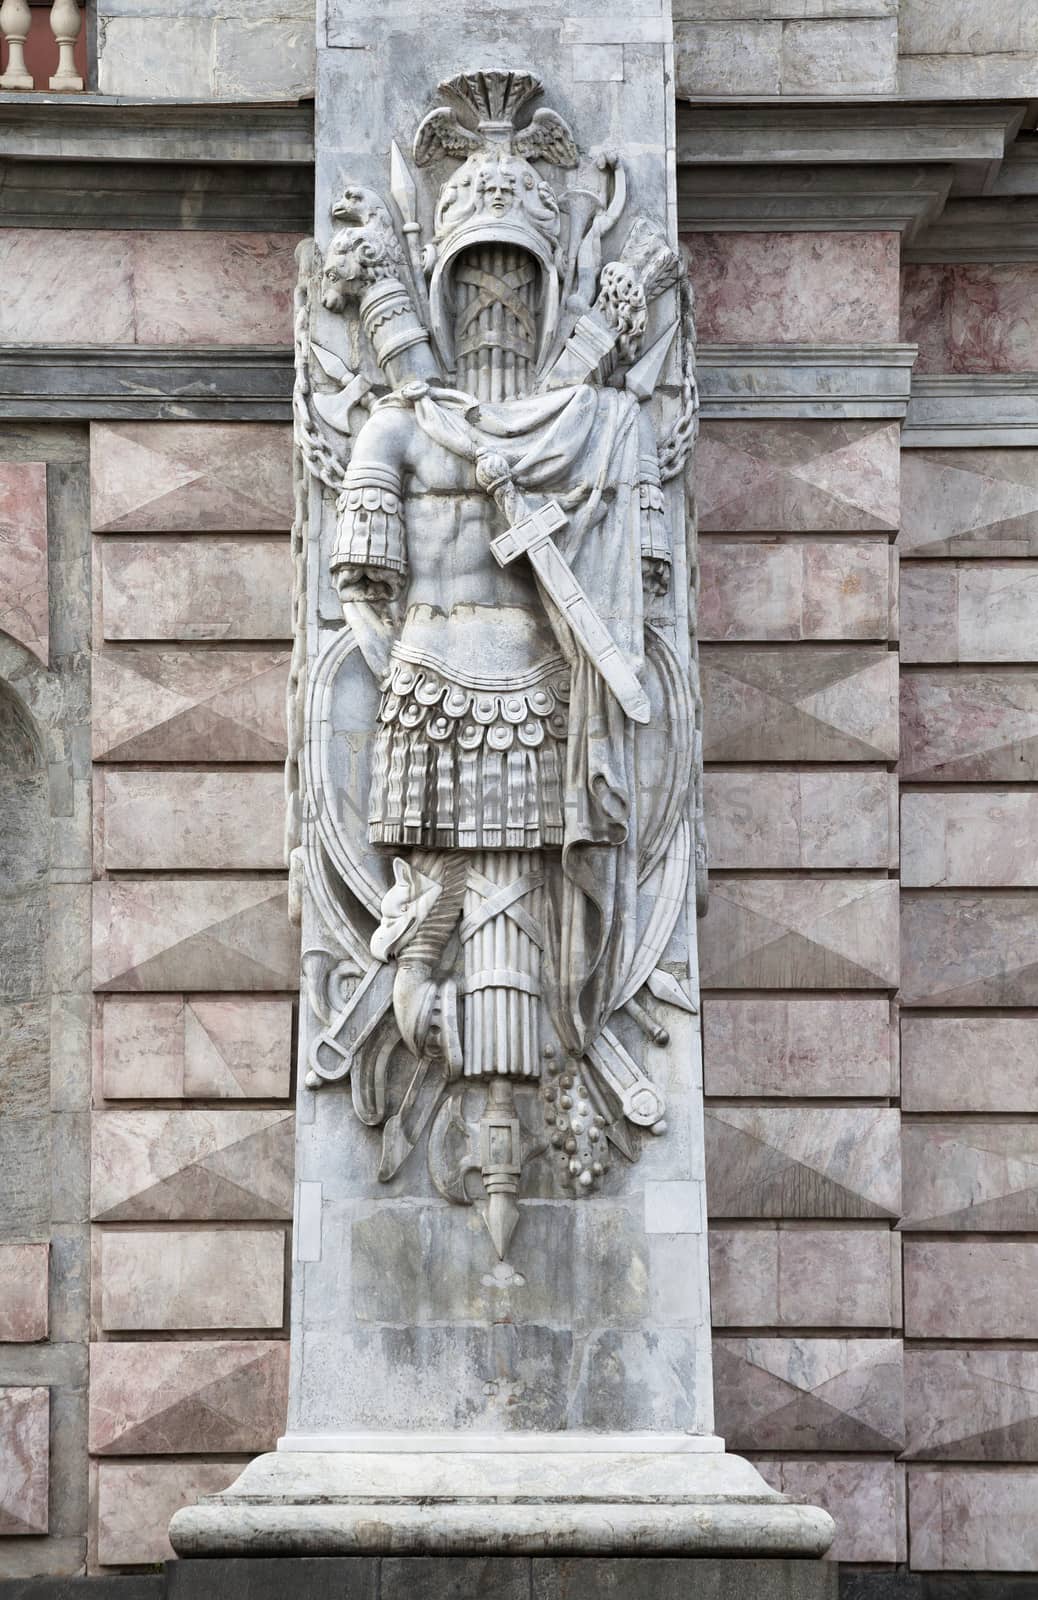 Bas-relief of a knight armor in Saint Petersburg, Russia